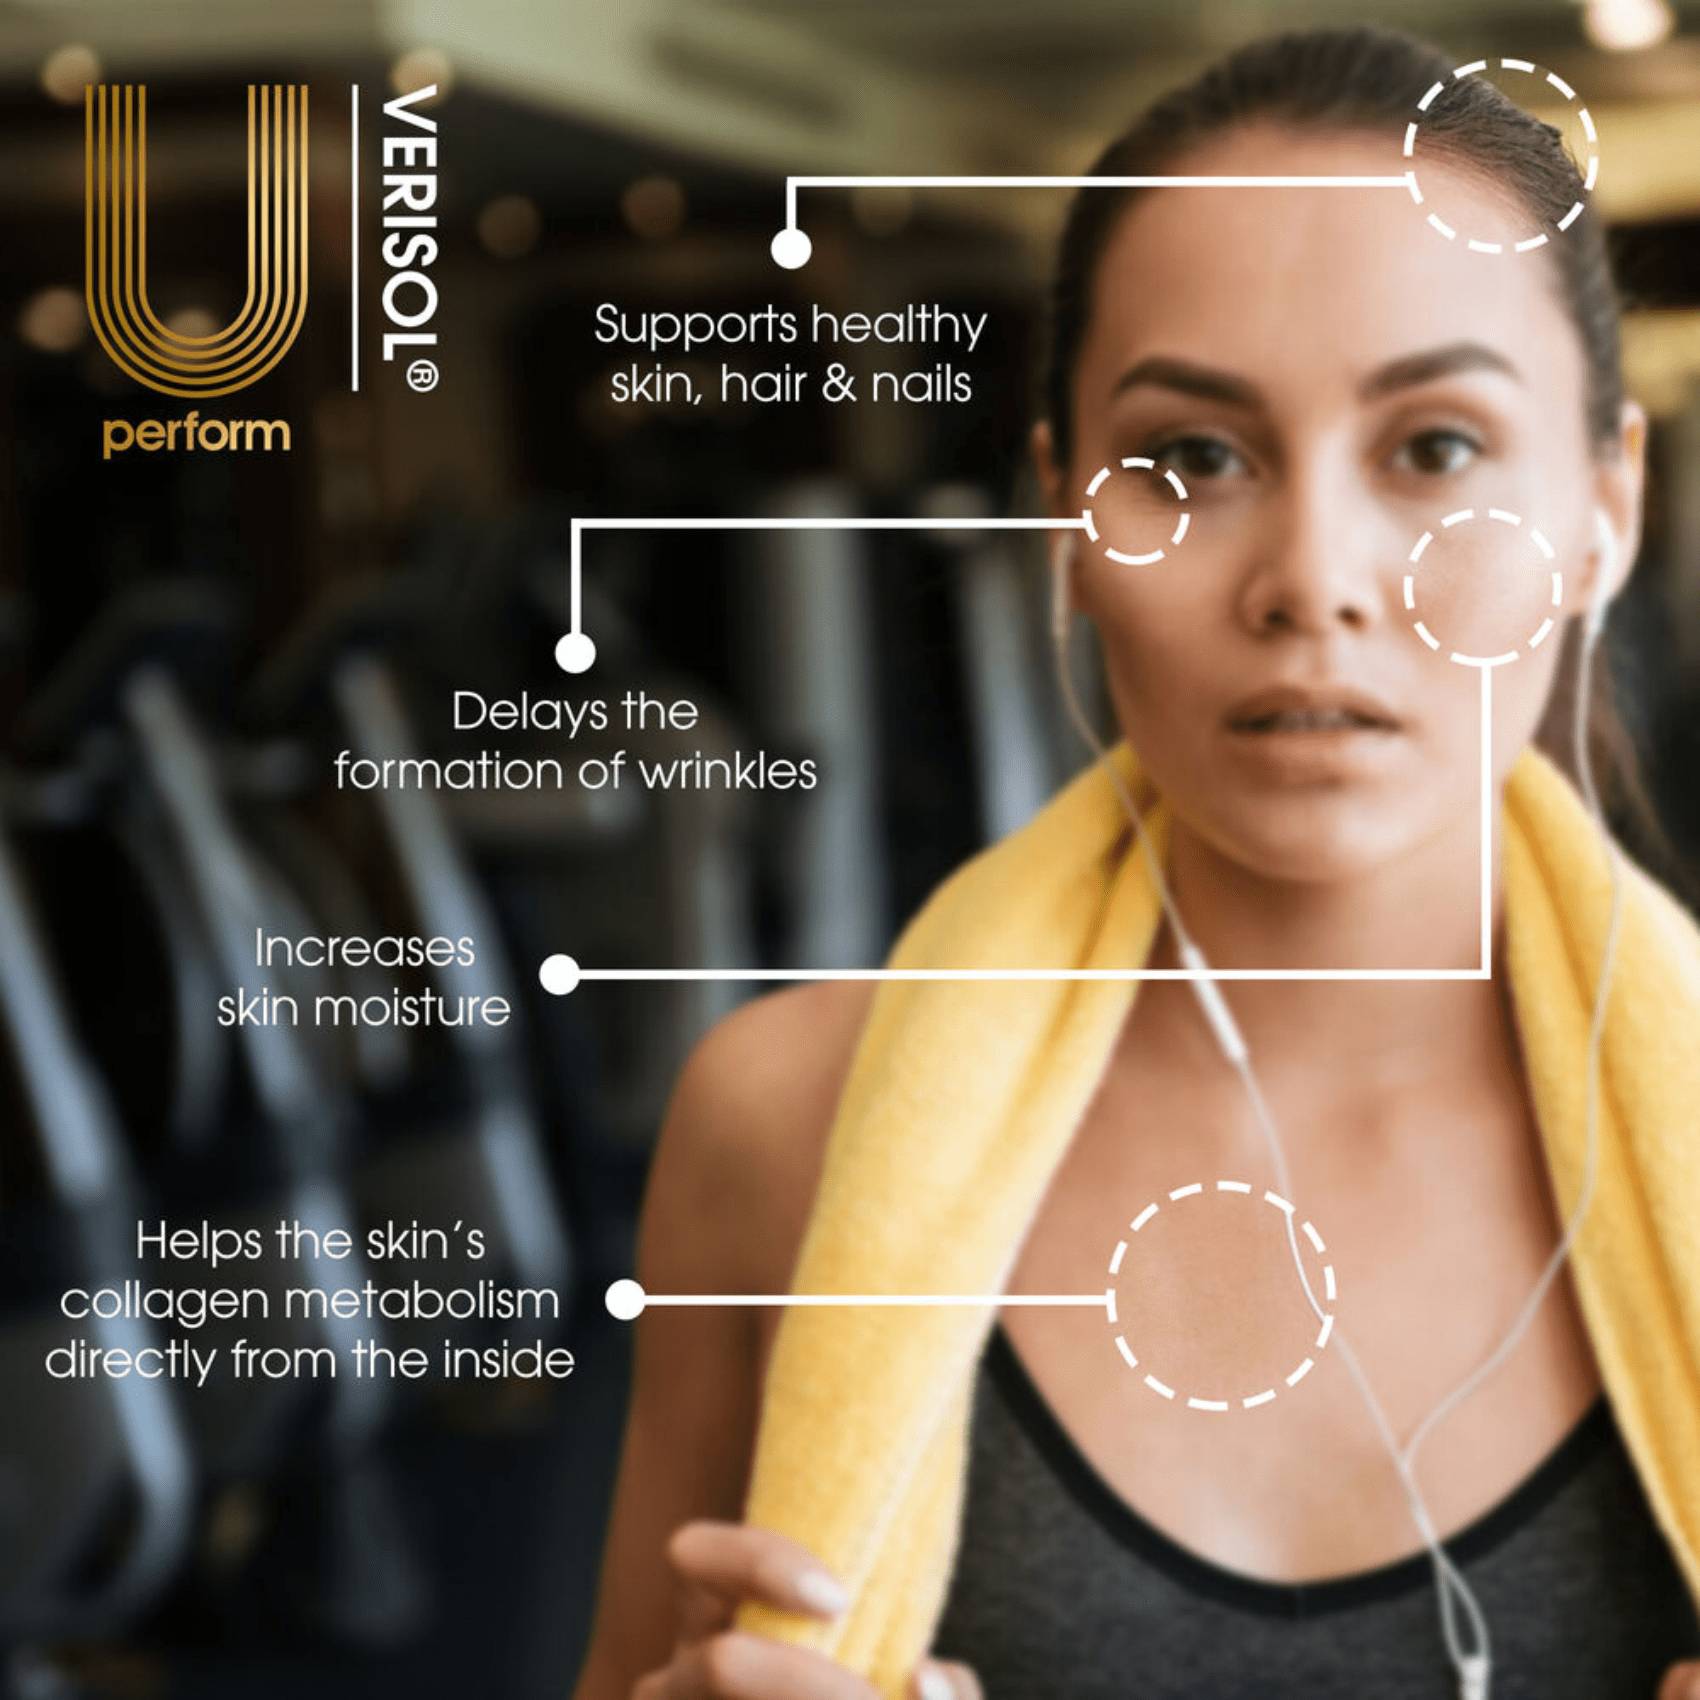 woman standing in gym wearing sports bra music headphones and holding a towel around her neck - U Perform VERISOL Bioactive Collagen Peptides Features & Benefits graphics